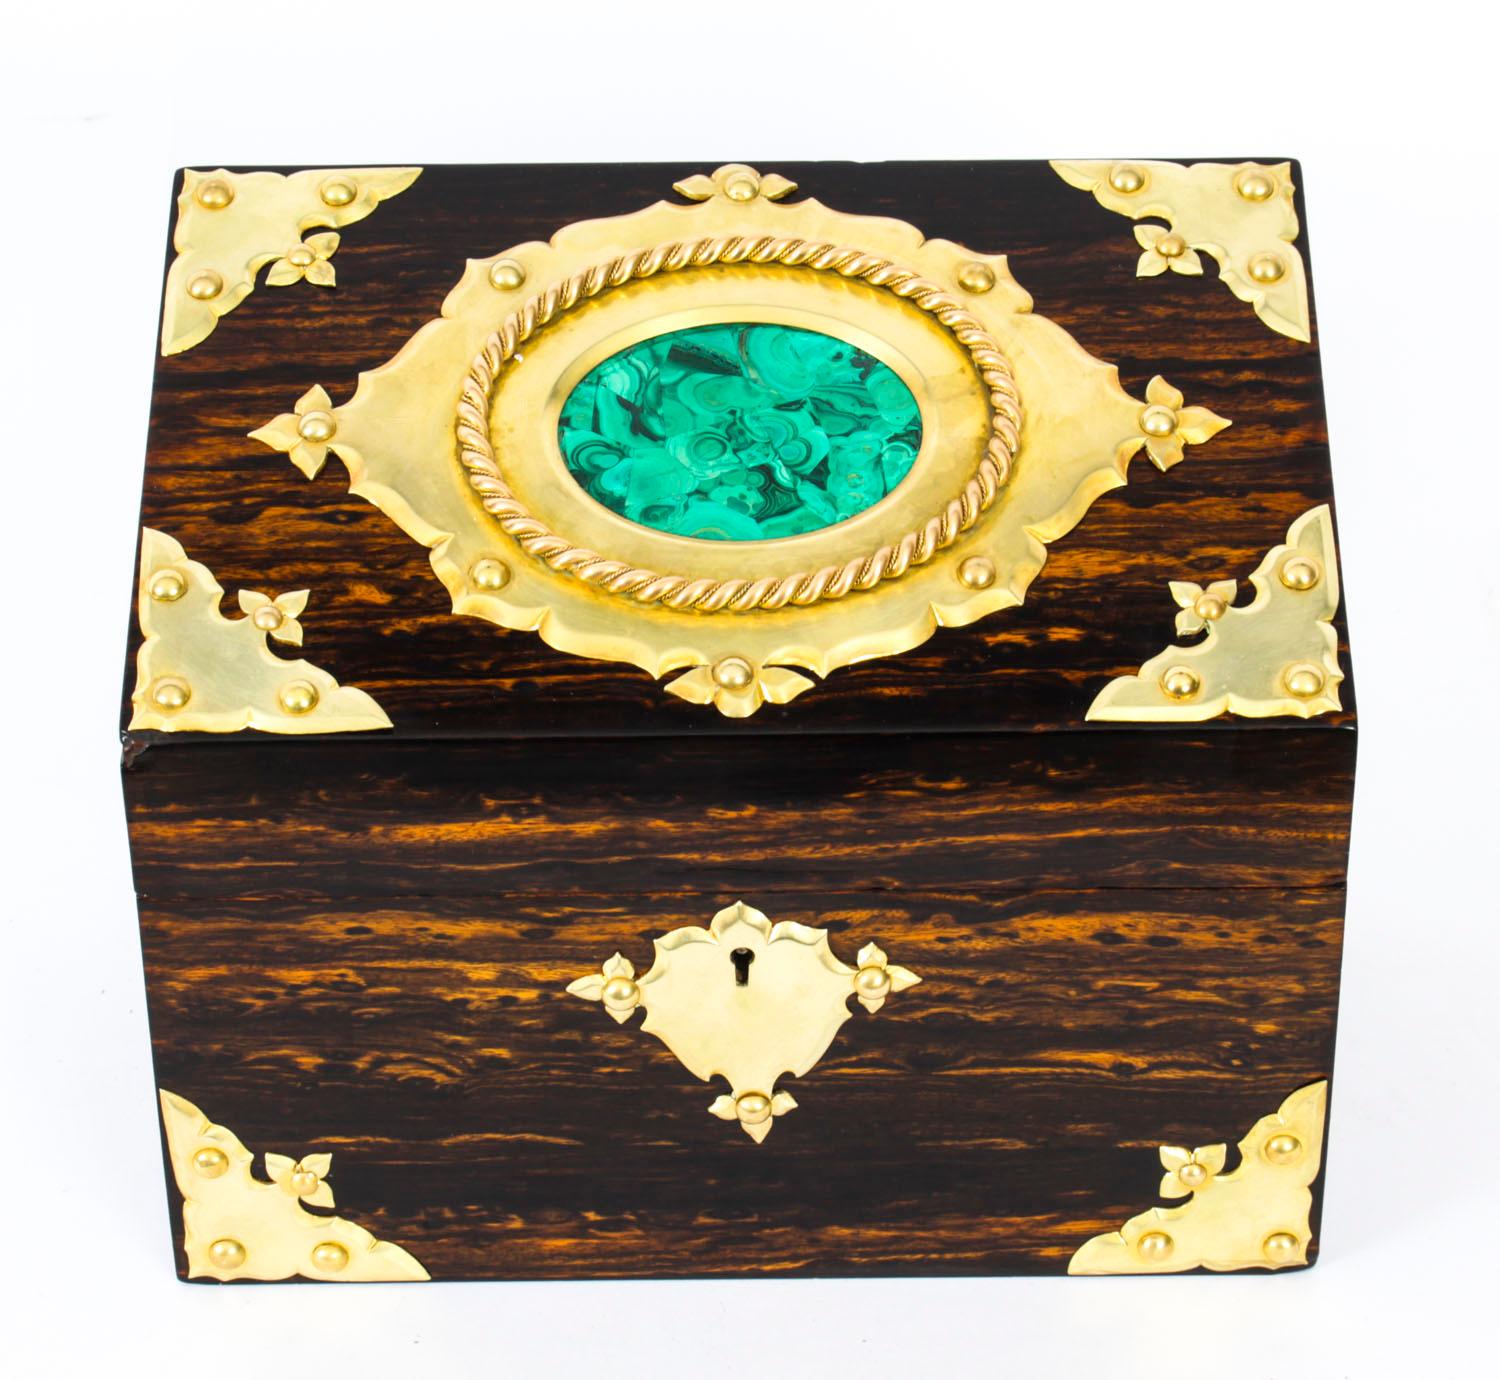 This is a stunning antique Victorian Gothic Revival coromandel stationery box casket, circa 1840 in date.
 
Elaborately decorated with gilt brass mounts and an attractive malachite oval set within a brass cartouche with rope twist surmount.
